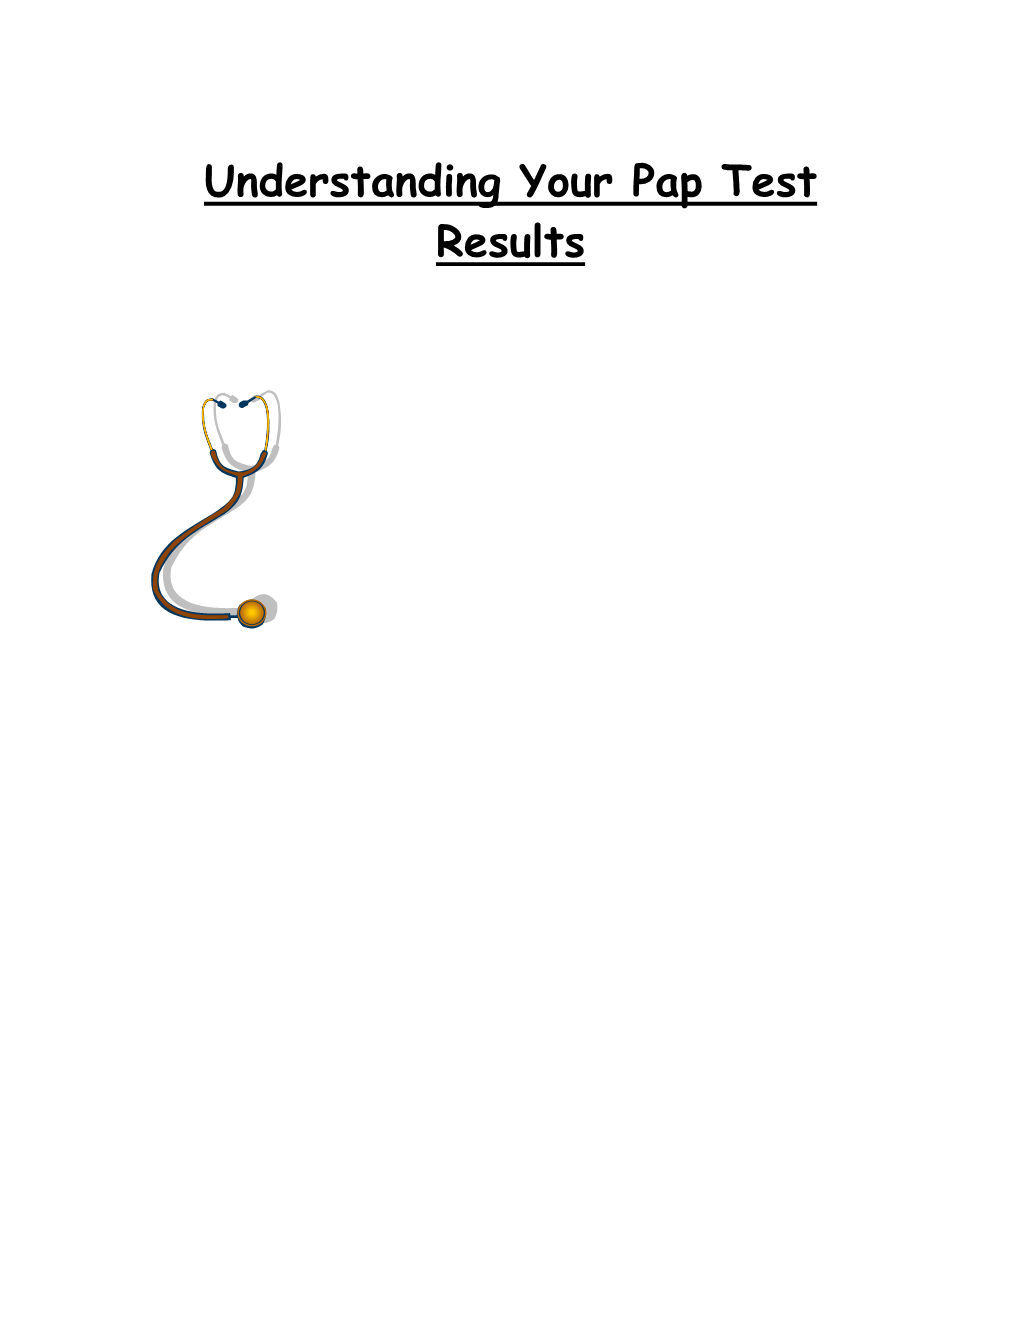 Understanding Your Pap Test Results